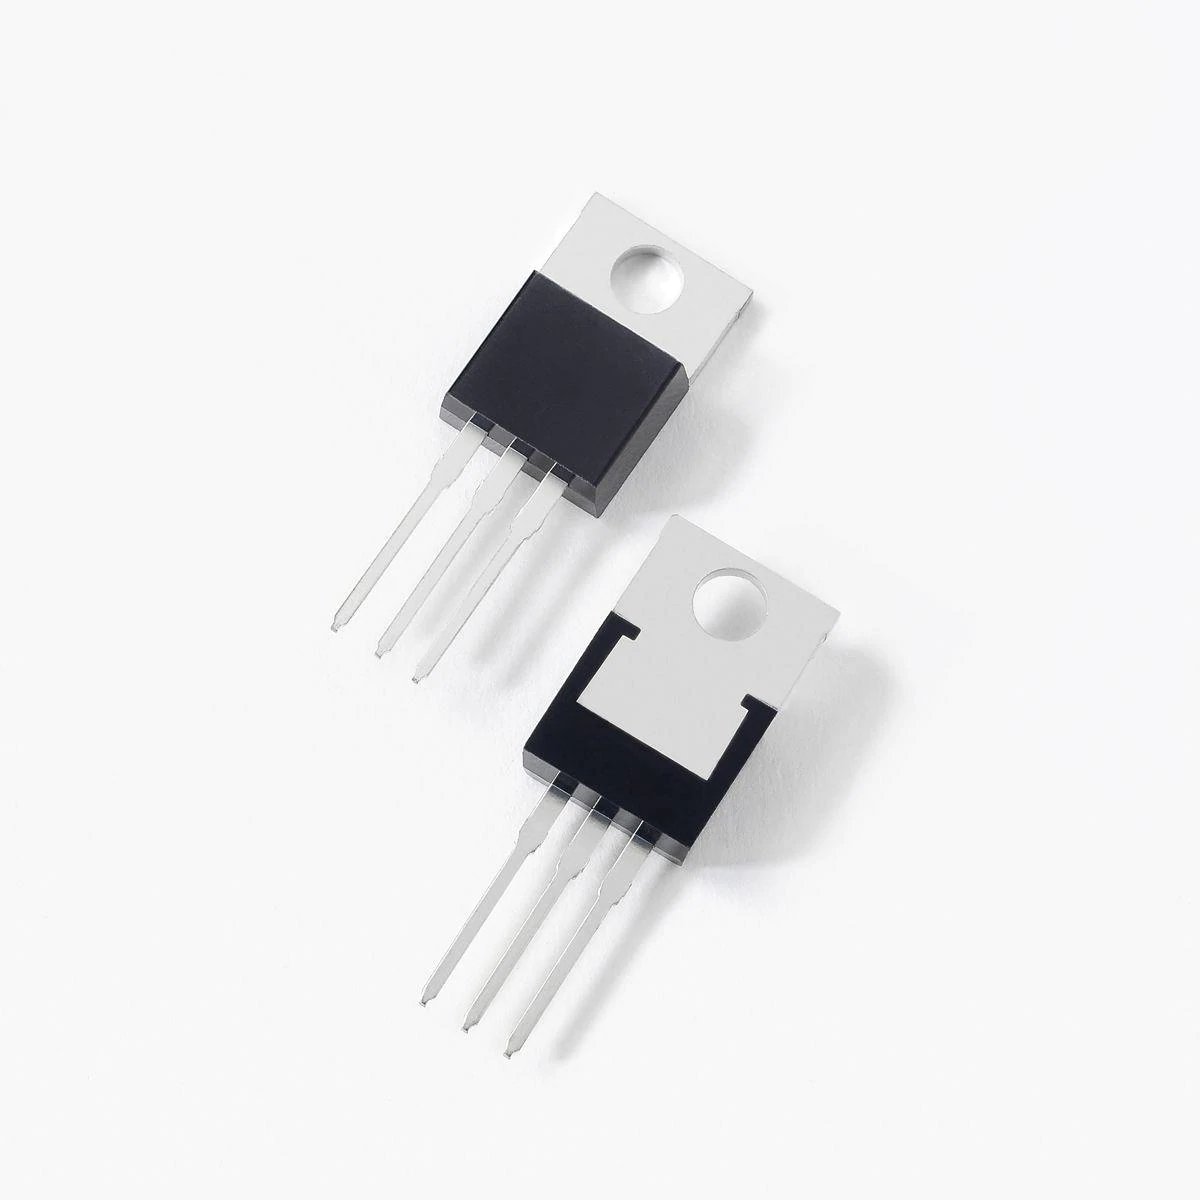 IRF5210 - (PARLAK)   TO-220   40A 100V 0.06Ω   P-CHANNEL MOSFET